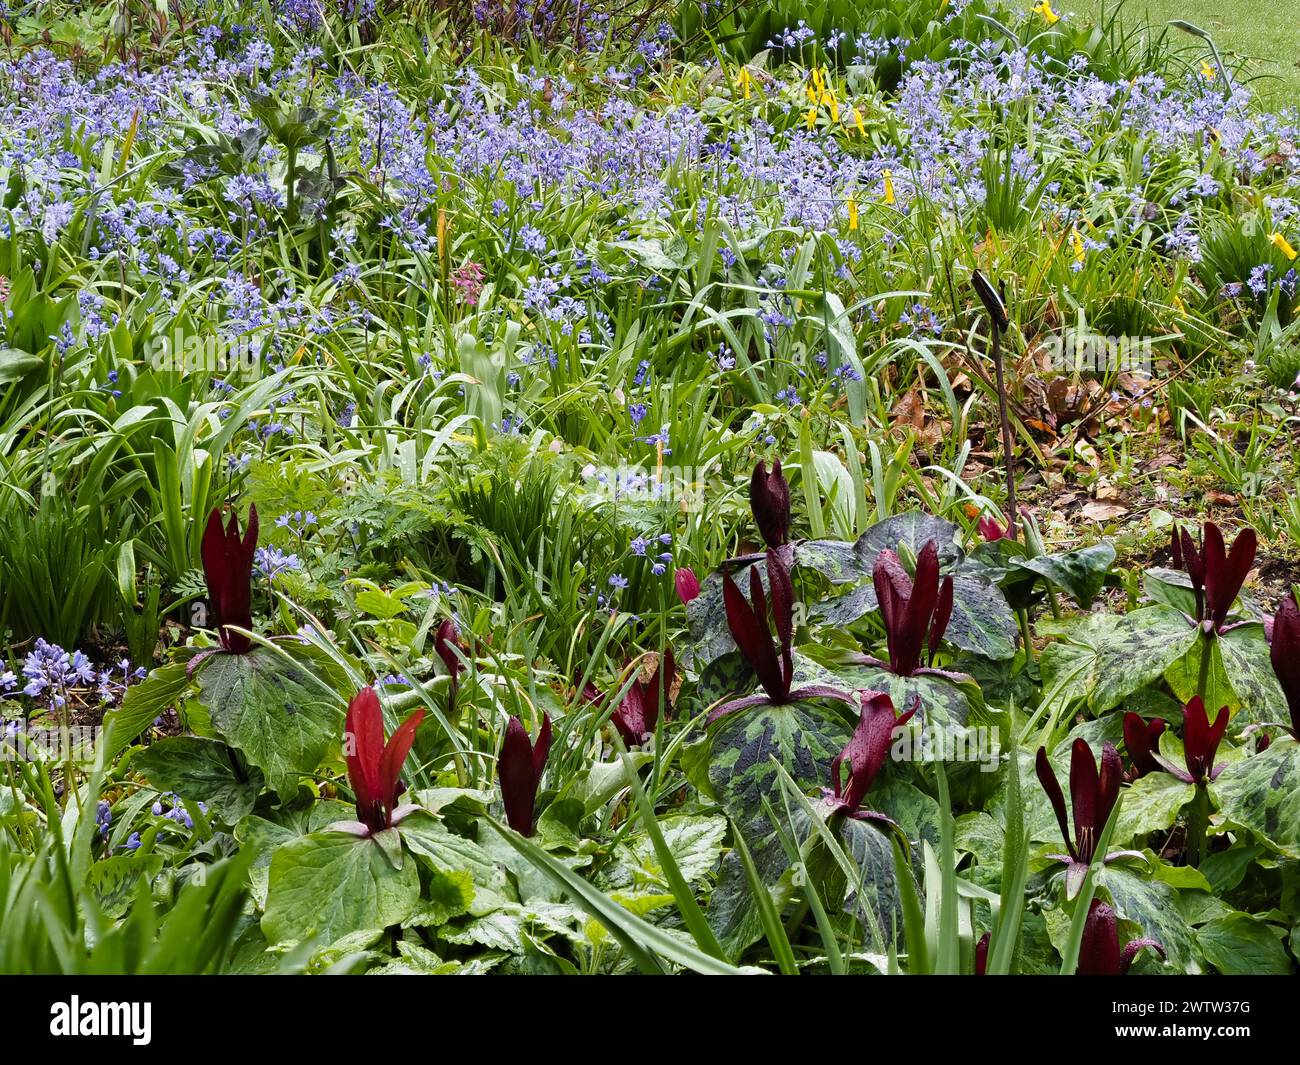 Red flowers of the spring blooming hardy corm, Trillium chloropetalum 'Rubrum', stand above the mottled foliage Stock Photo